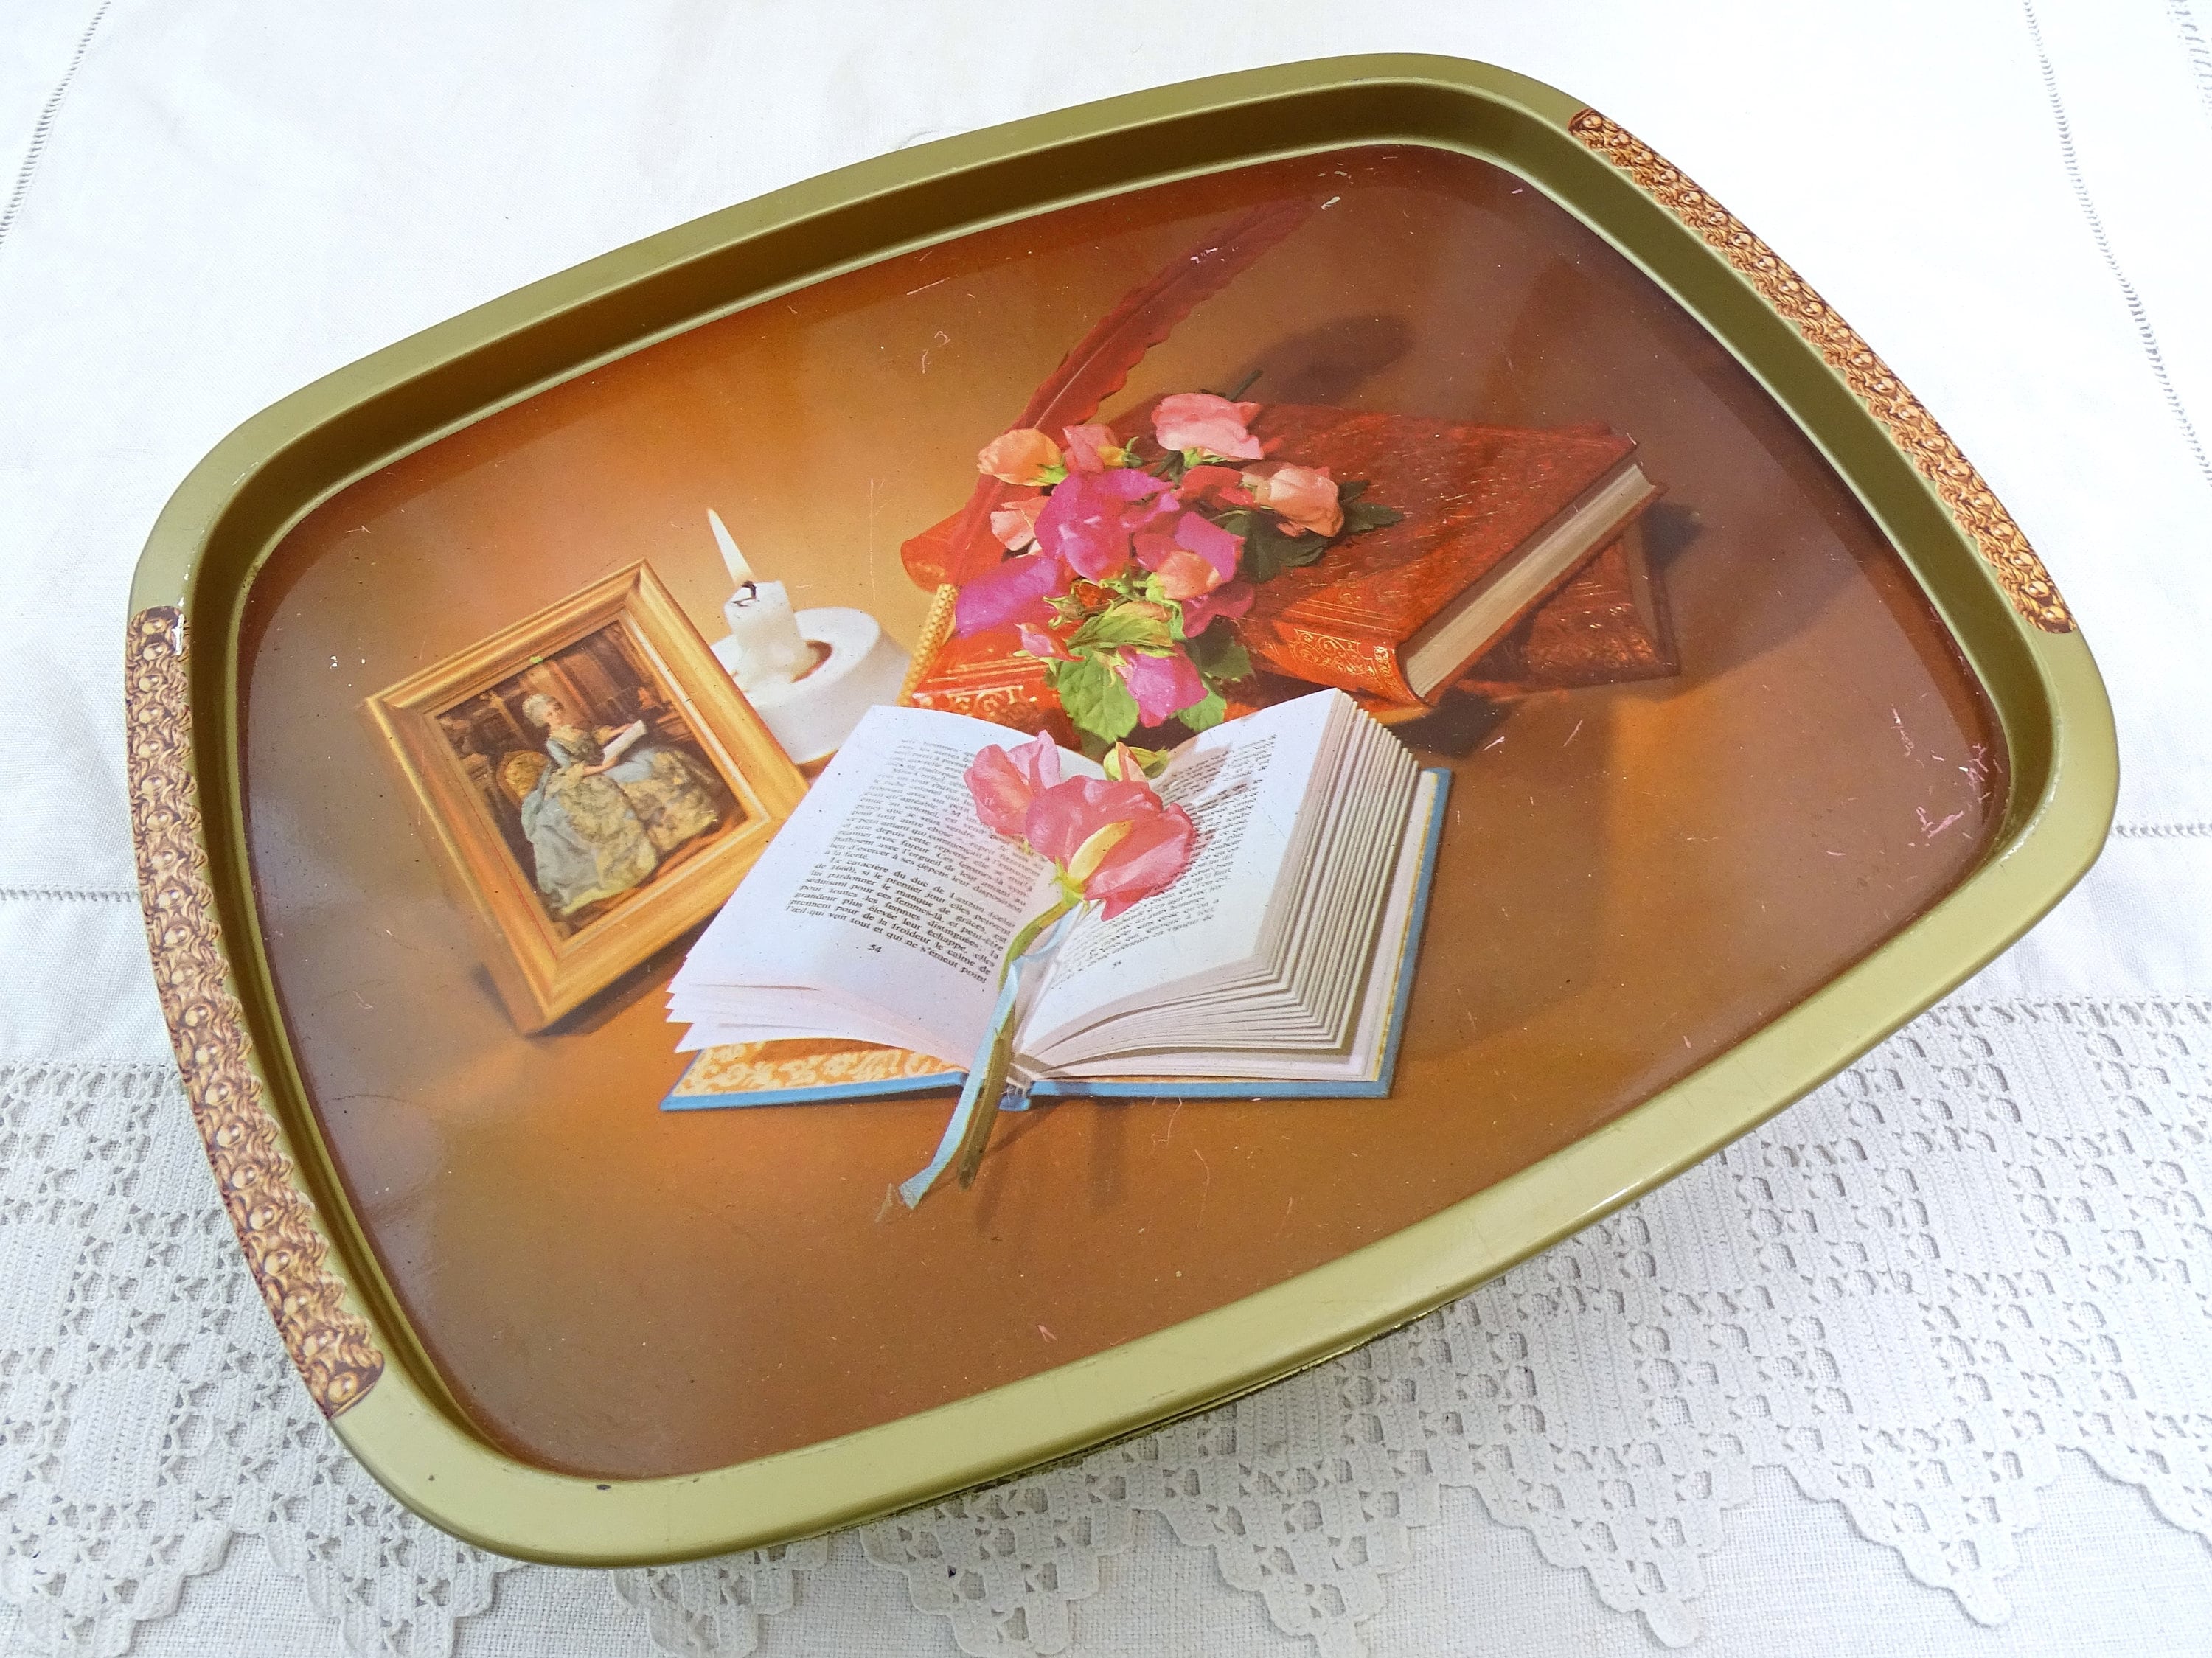 Enchanting Vintage Belgian Cookie Tin with Still Life: A Stylish Time Travel  to the 1960s-1970s!, VINTAGE TINS